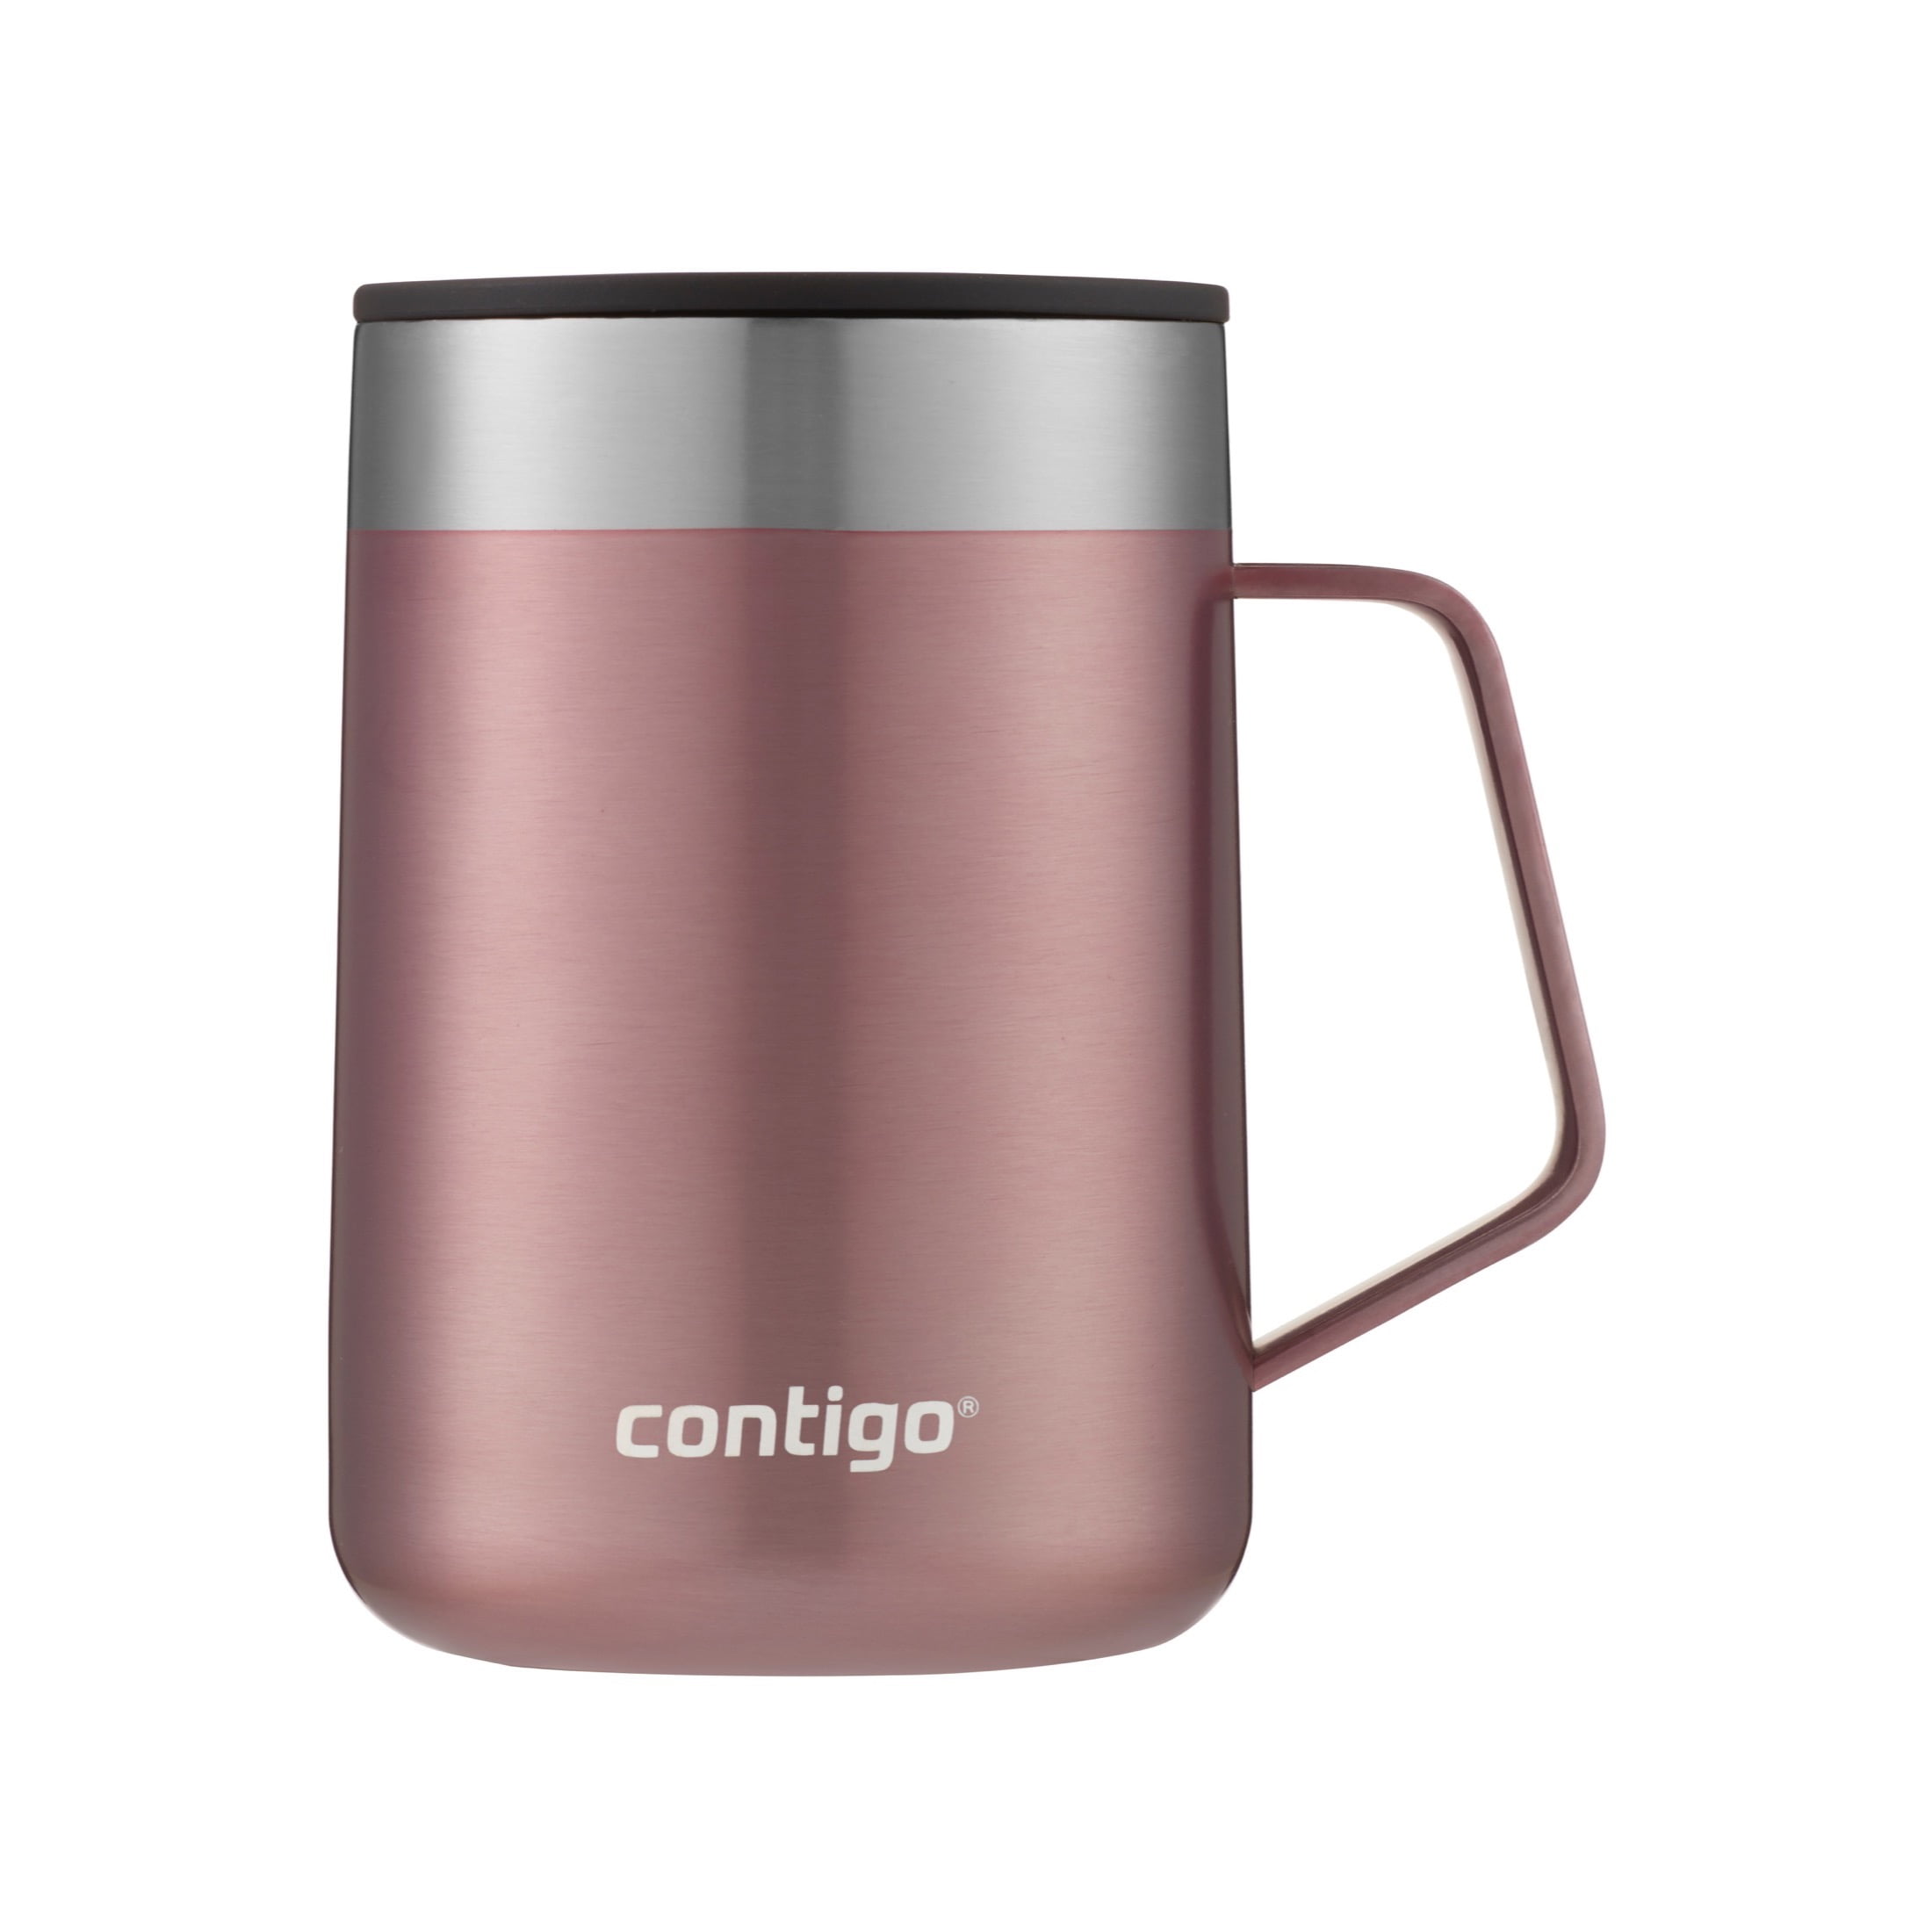 Contigo Streeterville Stainless Steel Travel Mugs with Splash-Proof Lid ( Pack of 2) for ONLY $13.99 (Was $27.99)! LINK IN…